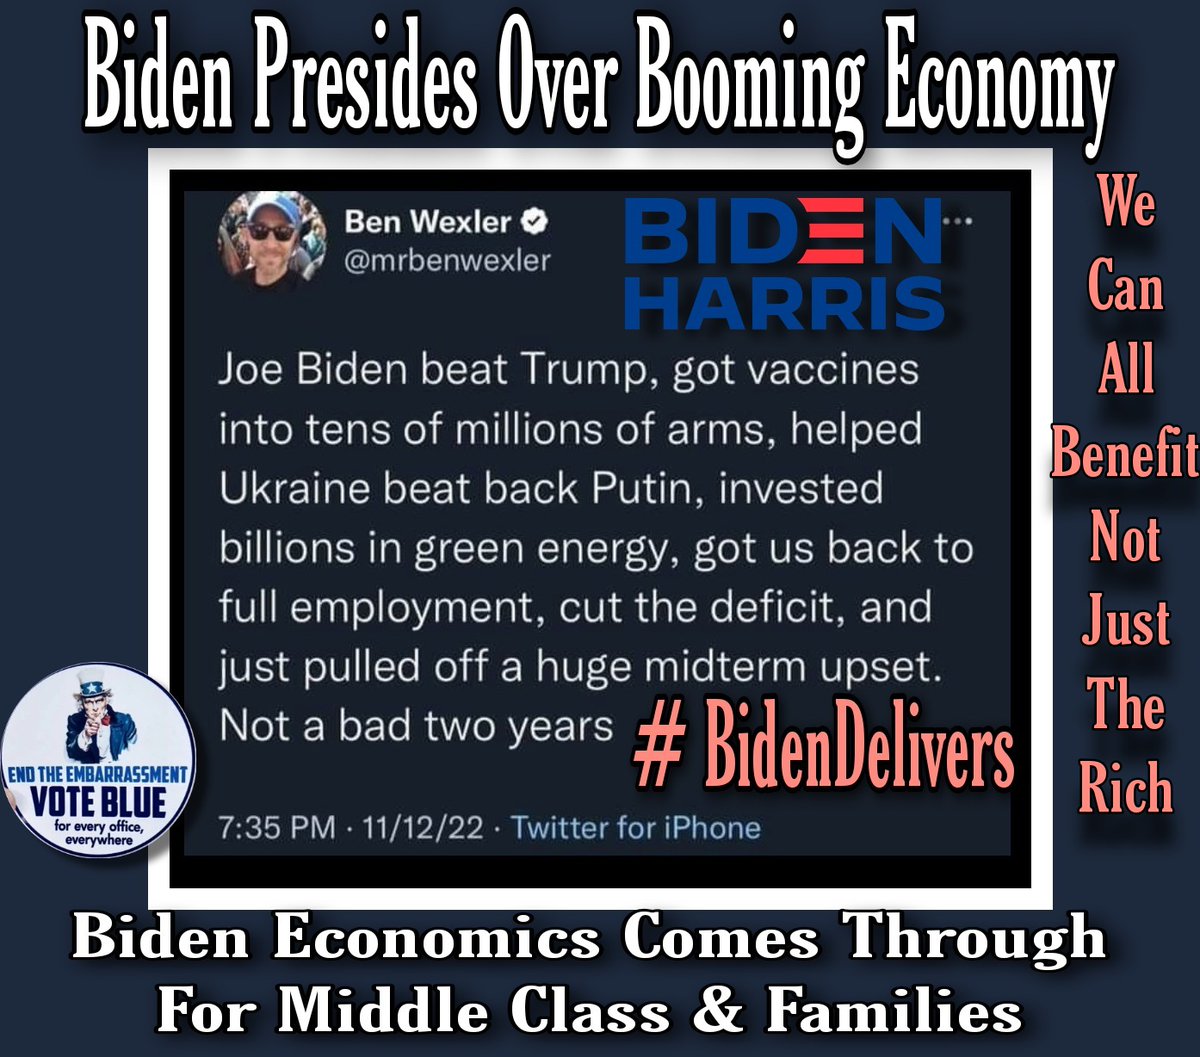 @POTUS #BidenomicsIsGreatForAmerica because #BidenomicsWorks which is something we can't say about the @HouseGOP! ,Finally, #InfrastructureDevelopment is happening, #ClimateAction #InternetAccess #LowerDrugCosts & thankfully #NoGOPTaxScam instead let's have everyone pay their fair share